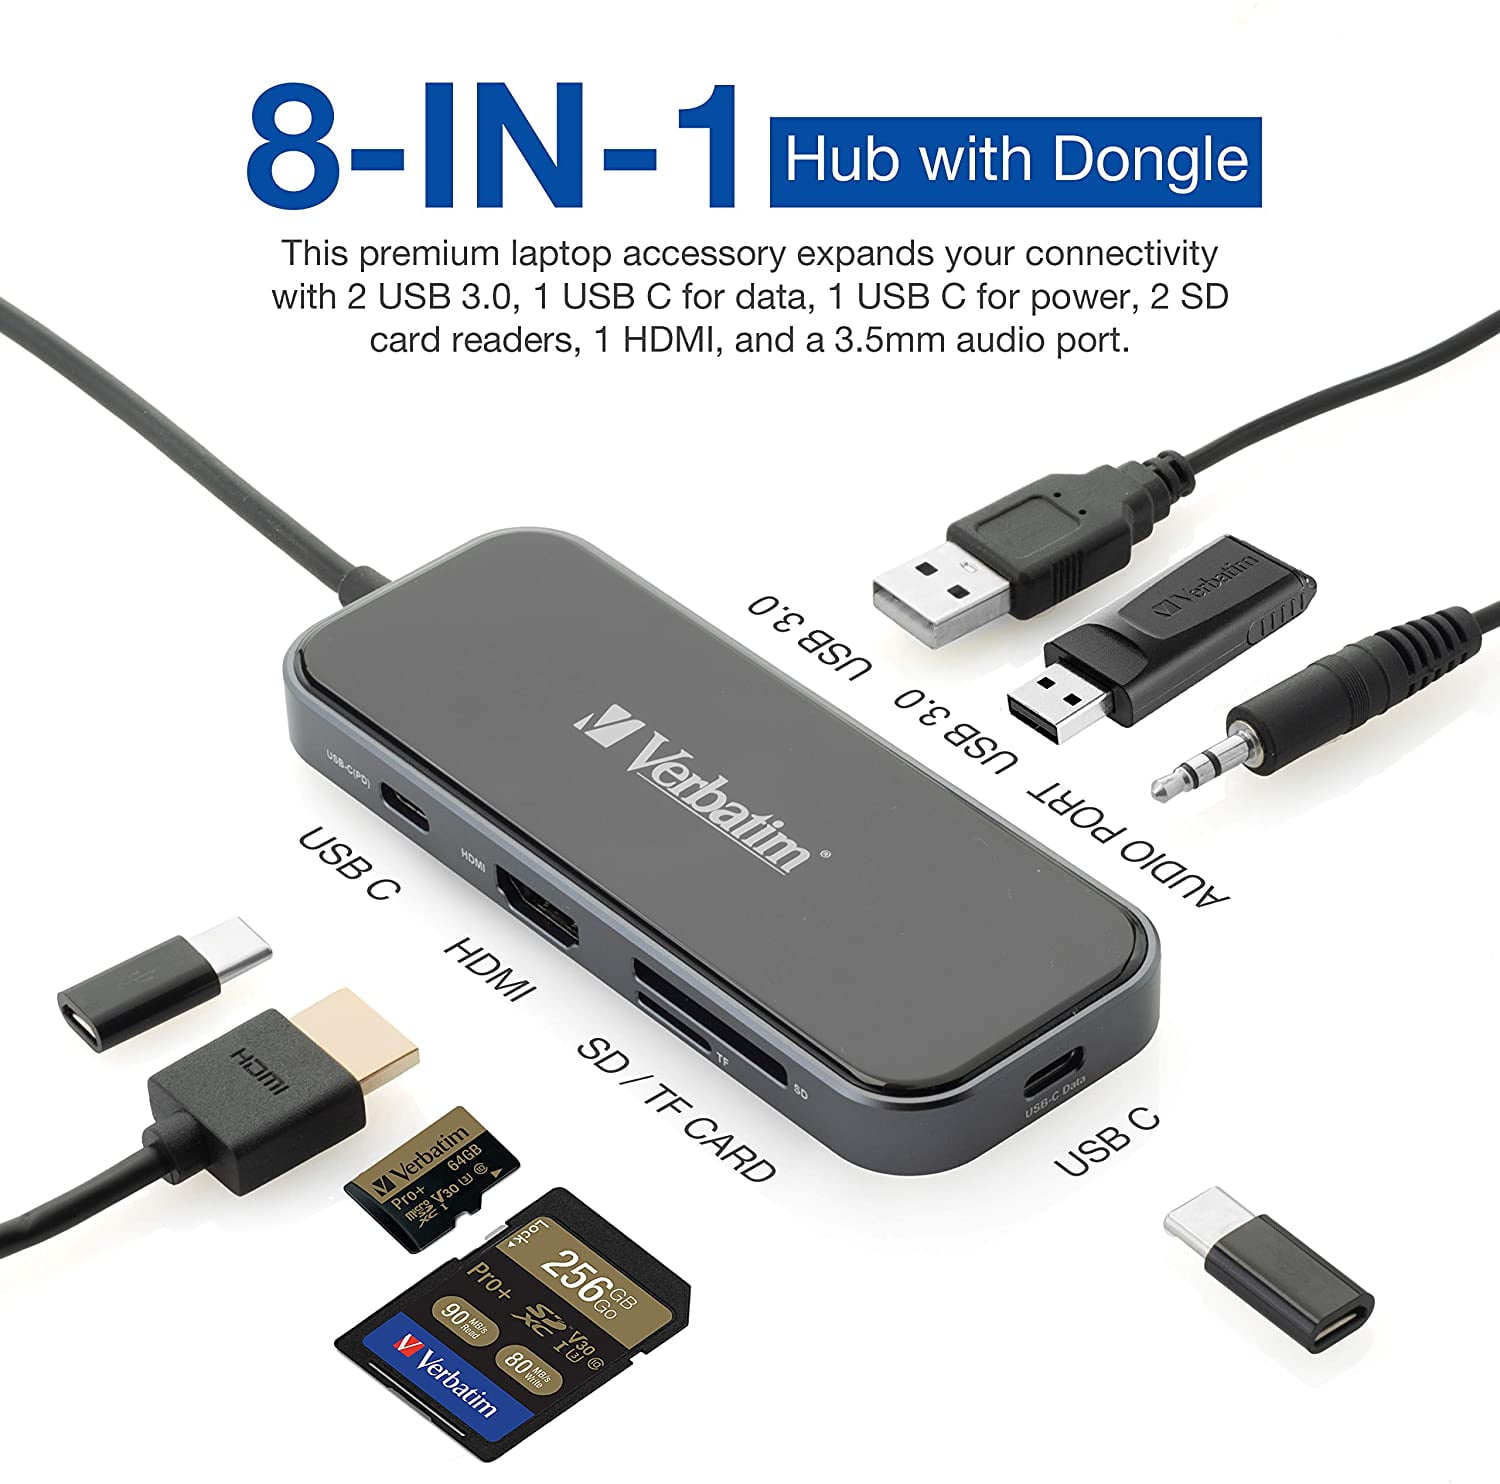 Verbatim 8-in-1 USB C Hub Adapter with 4K HDMI, 100W Power Delivery, 2 USB  3.0 Ports, 1 USB C, SD Card Readers, 3.5mm Audio Port for USB C Laptops 